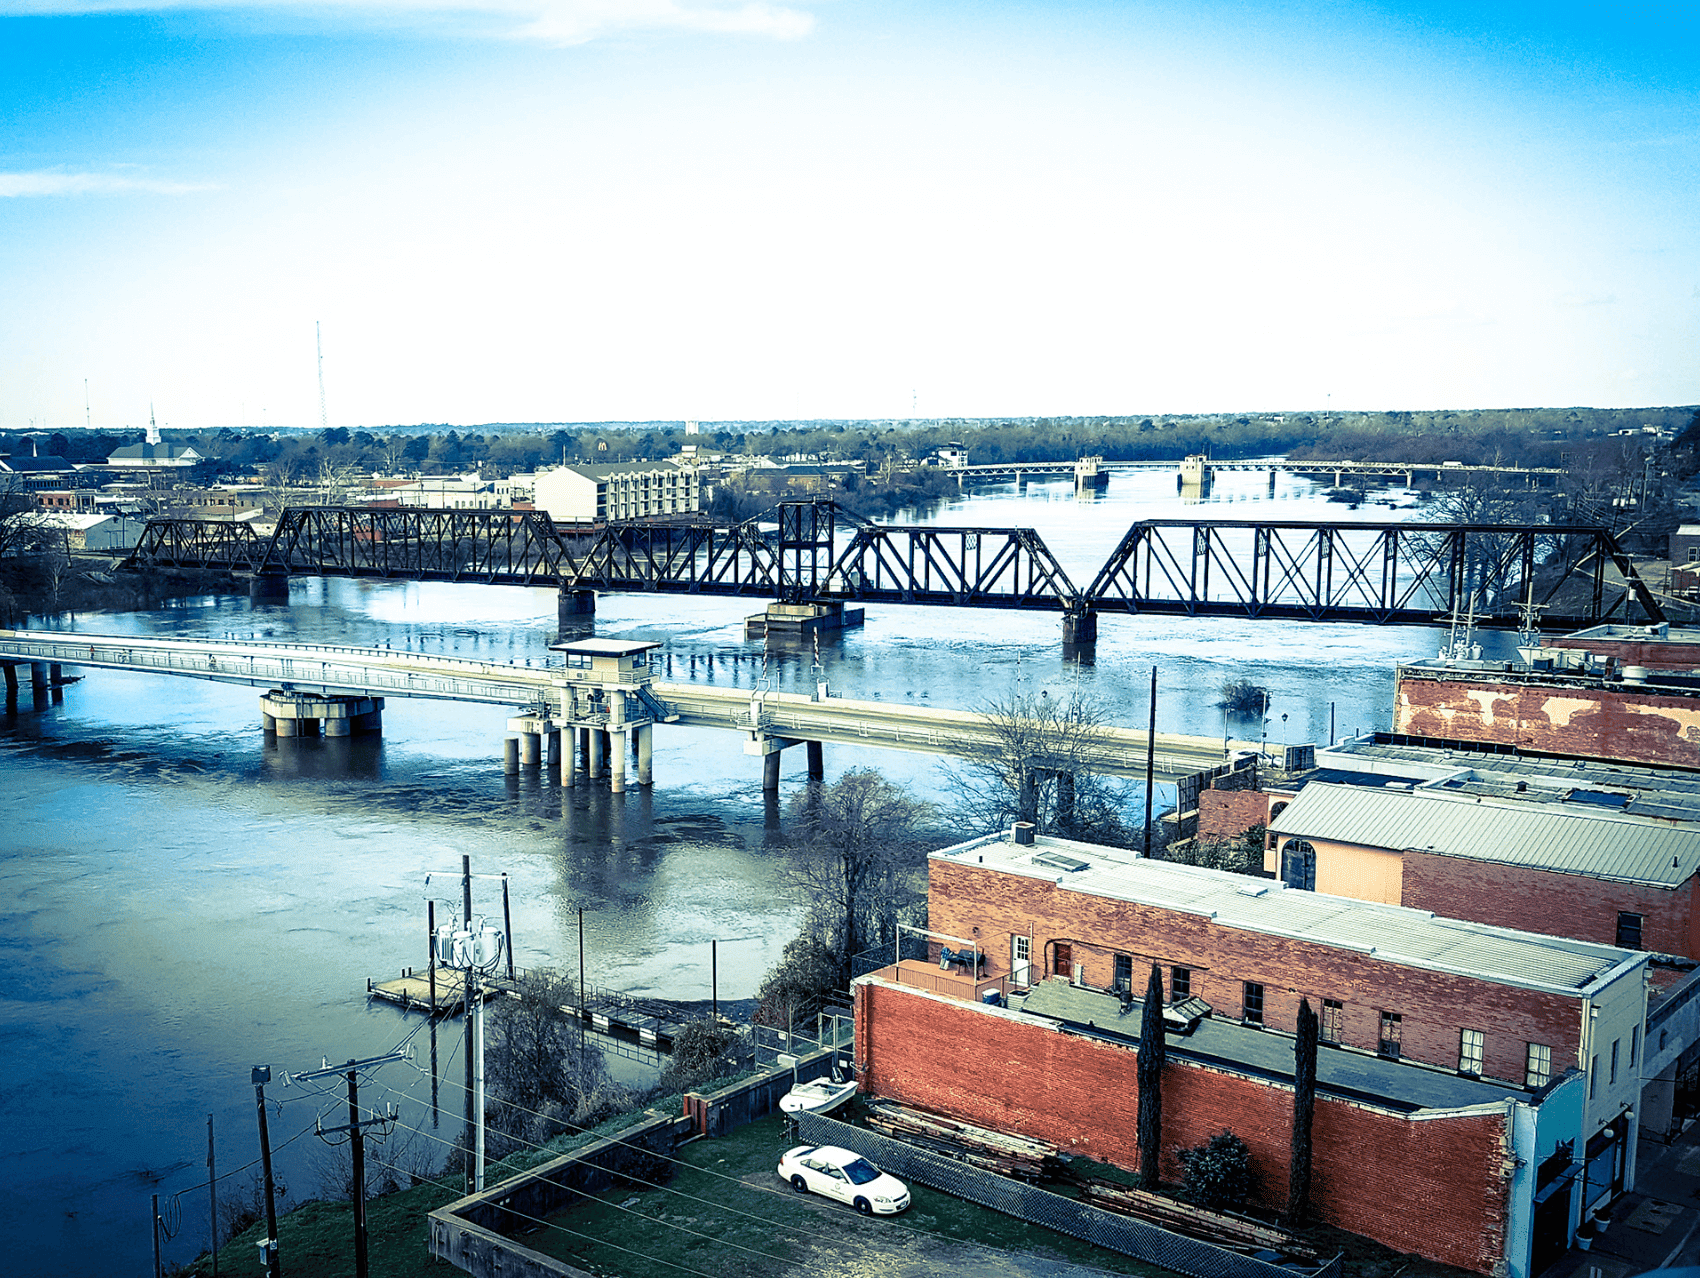 skyview of the Ouachita River from the Monroe, LA side